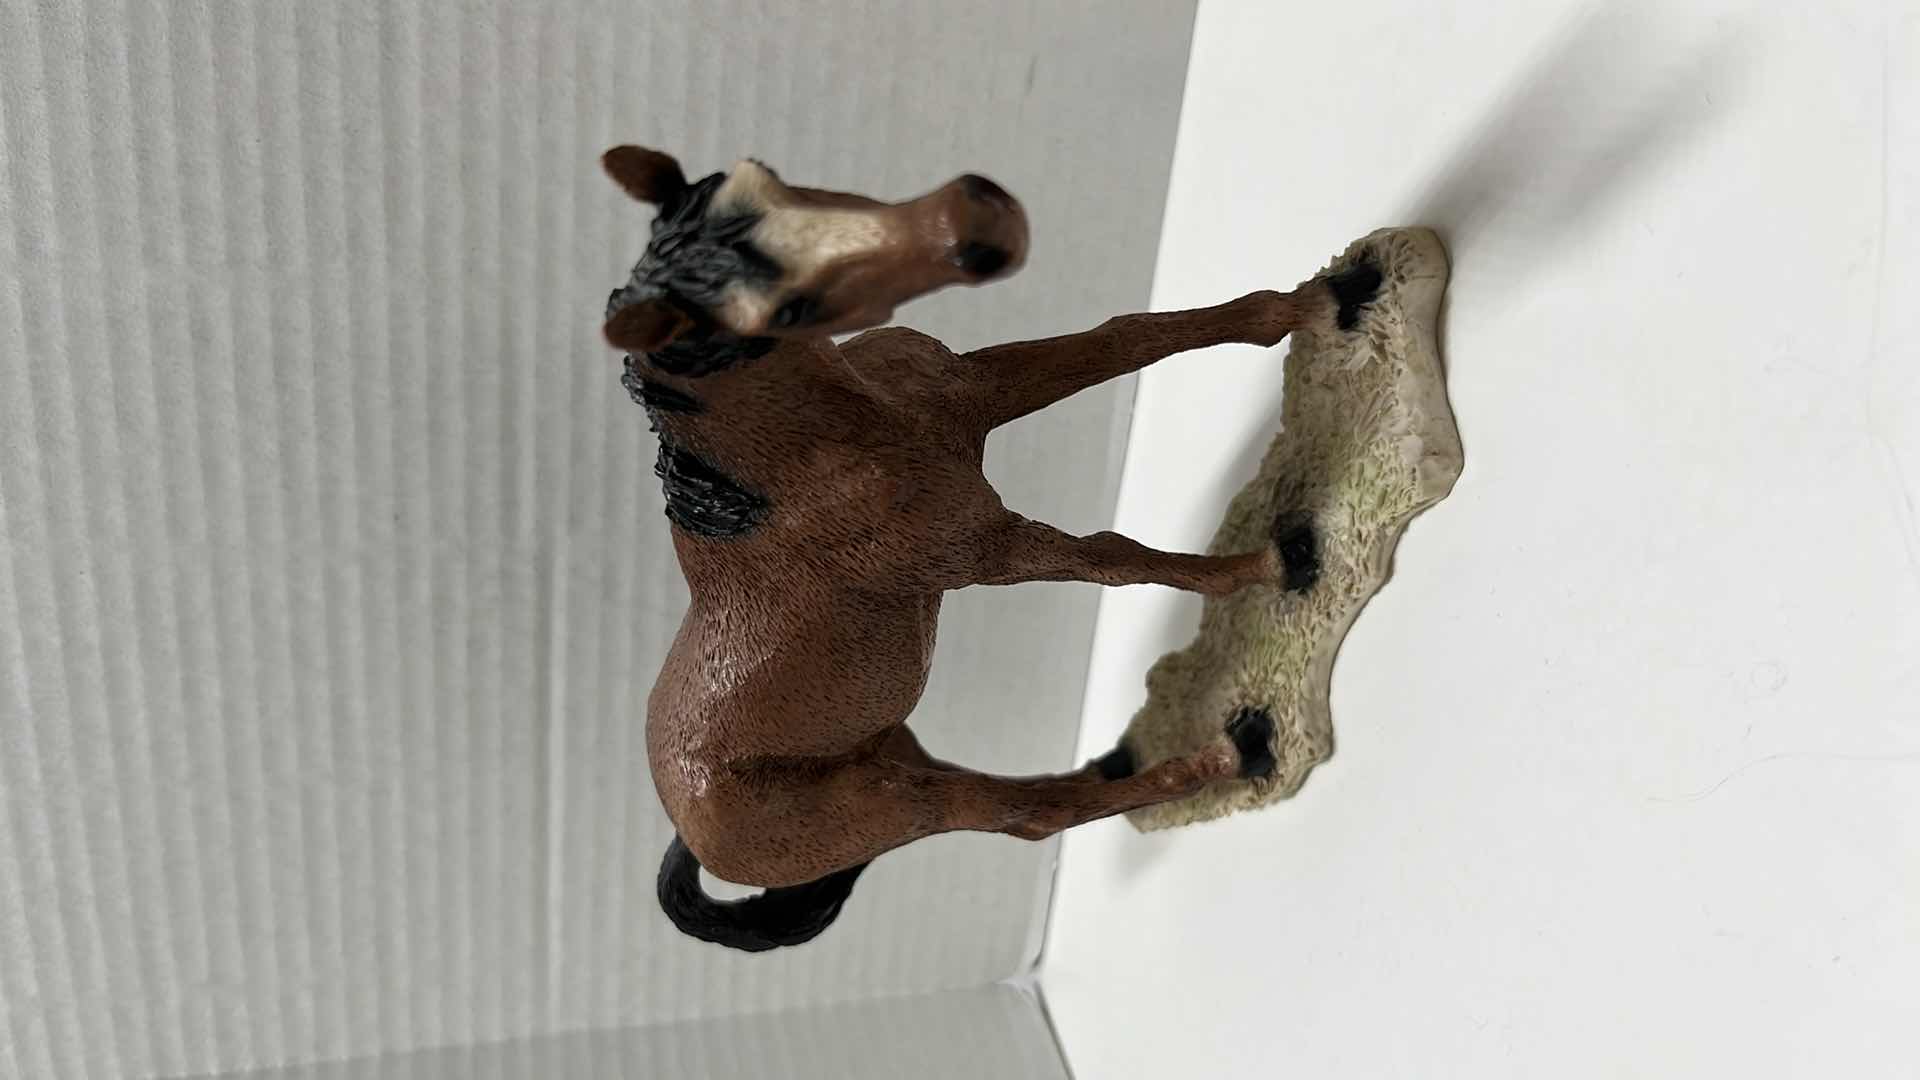 Photo 2 of CASTAGNA HORSE FIGURINE, 1988 MADE IN ITALY 2” X 7” H5” & STONE CRITTERS HORSE SORREL SC-410 FIGURINE (2)